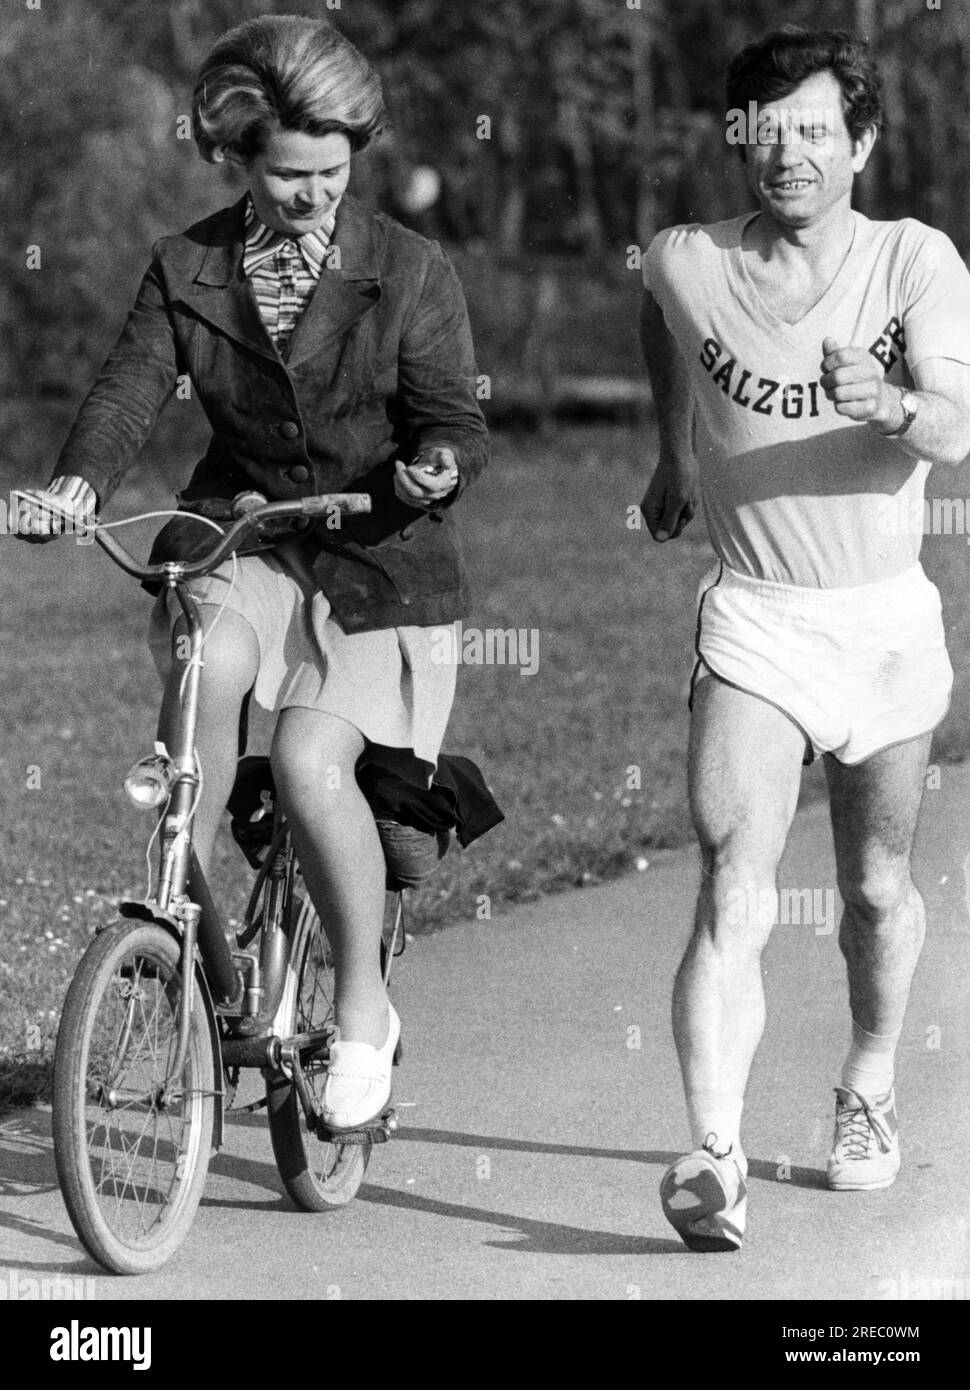 Weidner, Gerhard, 15.3.1933 - 25.9.2021, German athlete (athlete), with wife Helga, during training, ADDITIONAL-RIGHTS-CLEARANCE-INFO-NOT-AVAILABLE Stock Photo